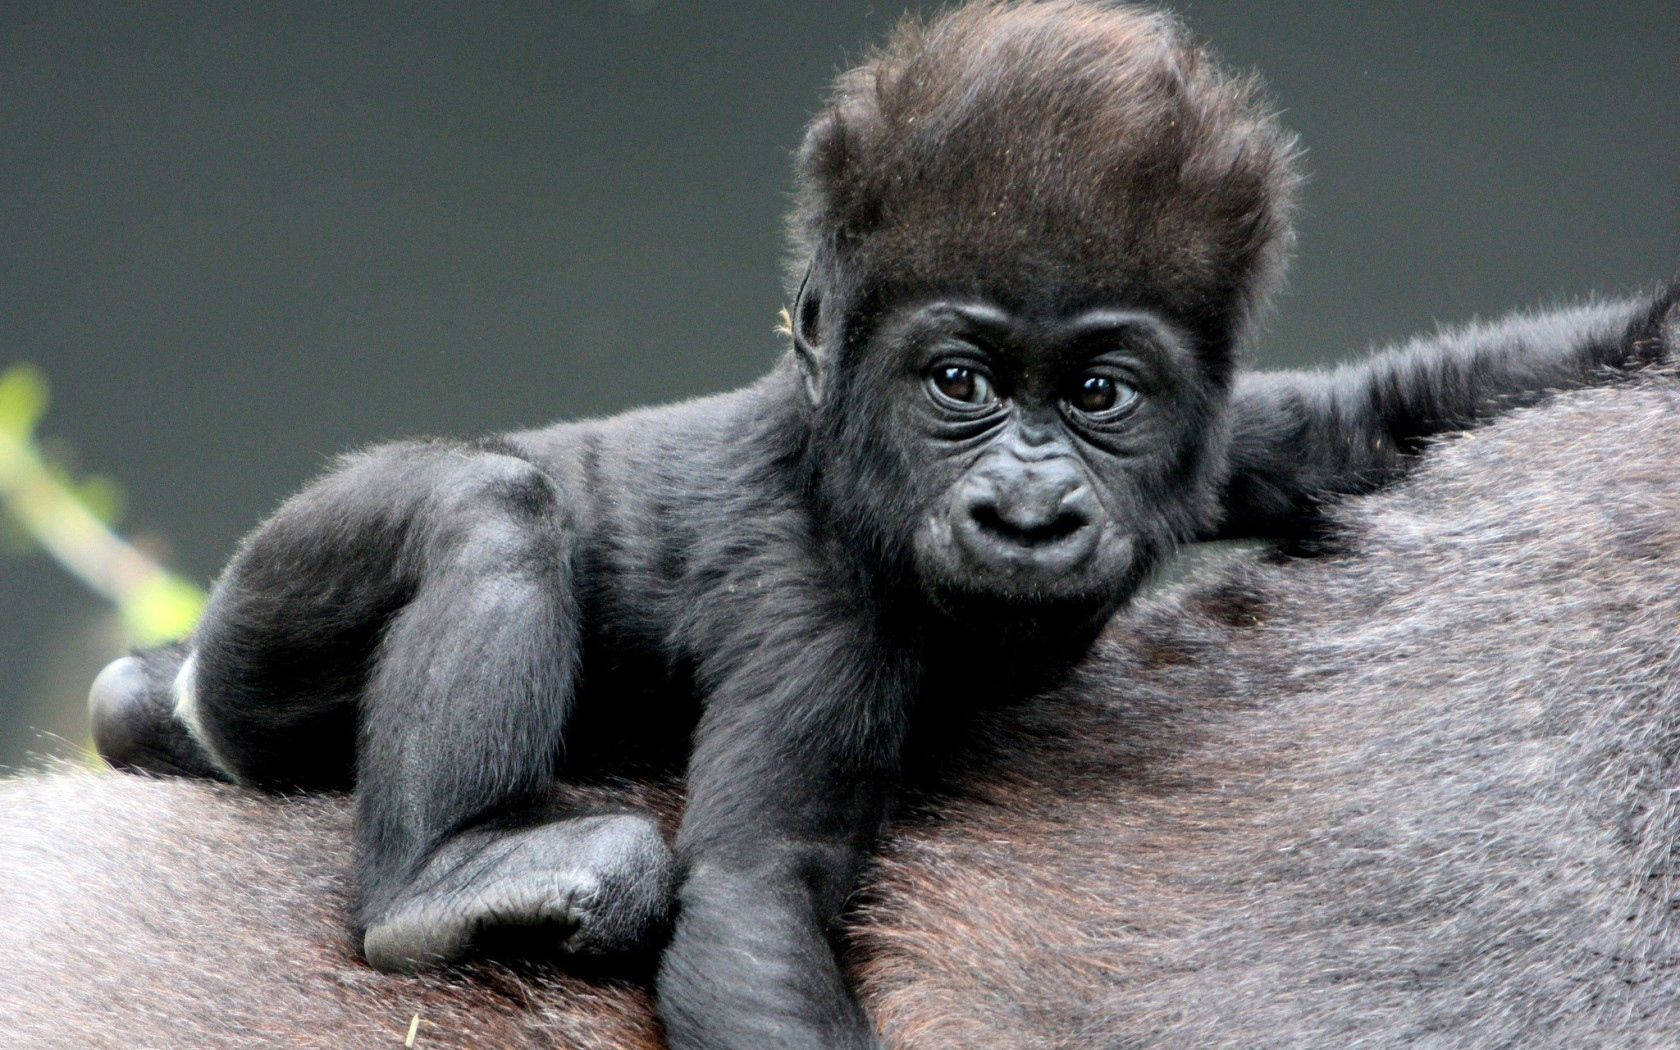 A baby gorilla enjoys its time playing in the woods. Wallpaper